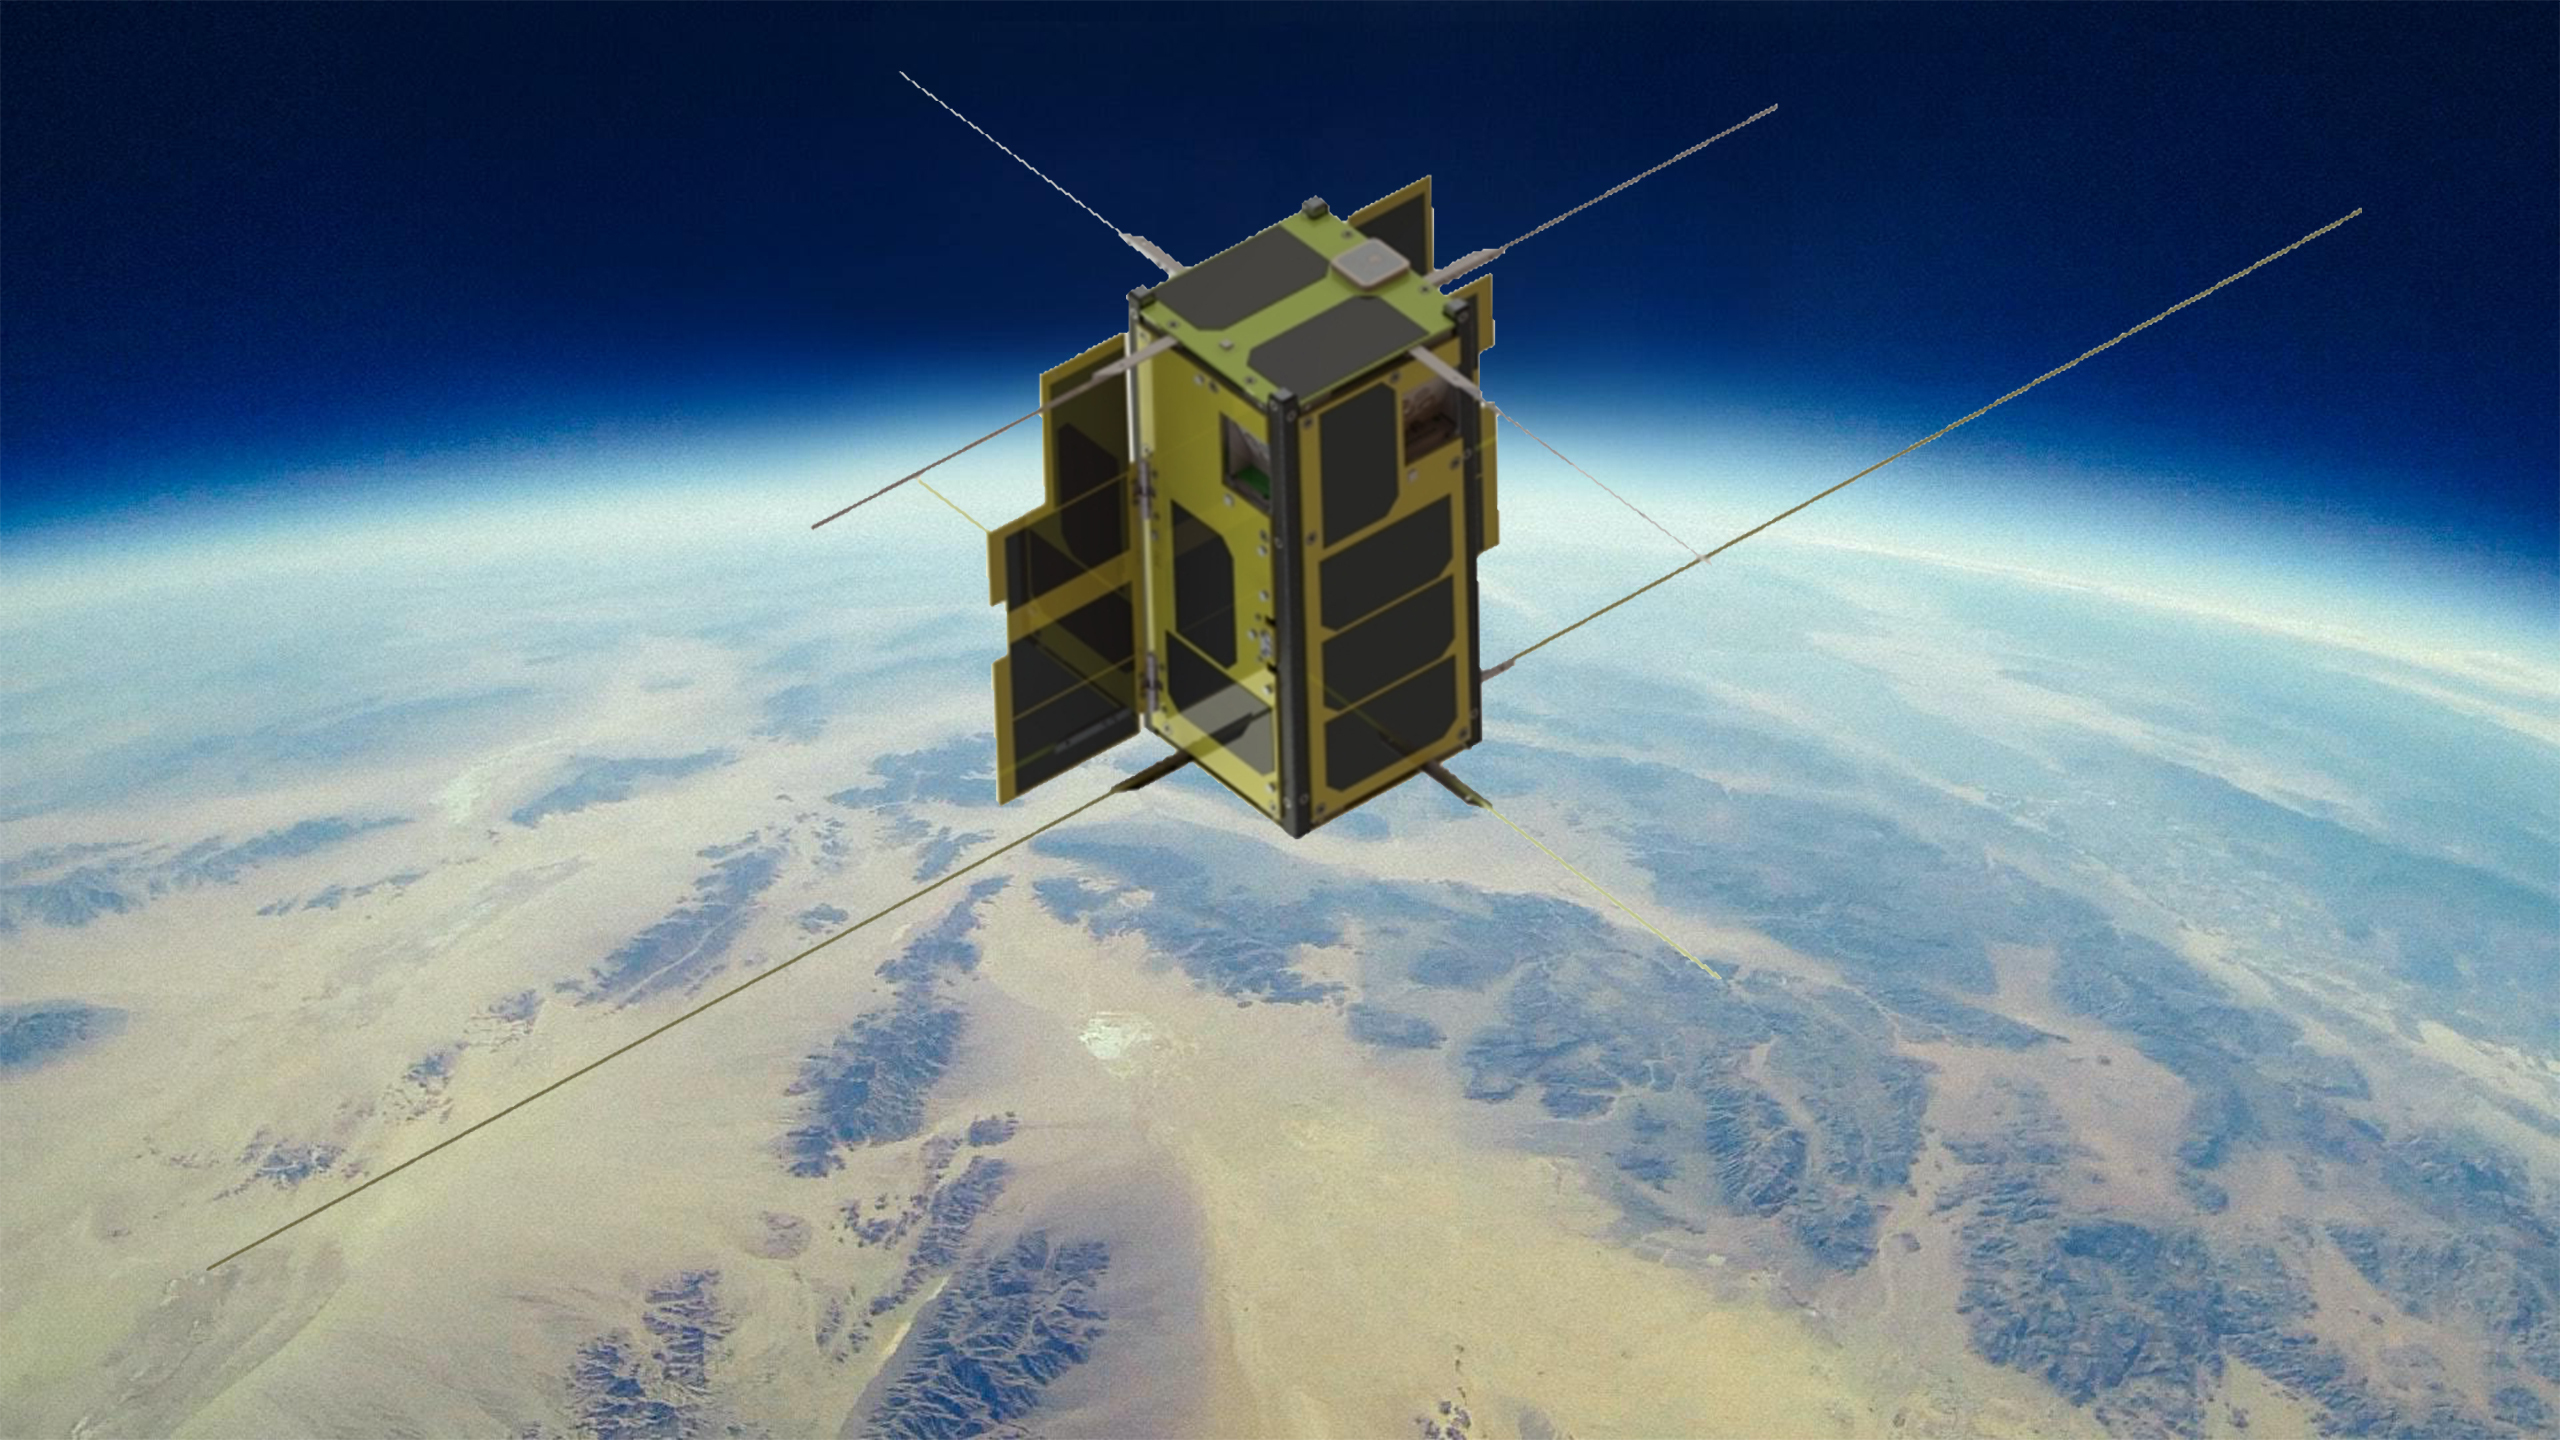 IRIS-A CubeSat is in smooth operation in space